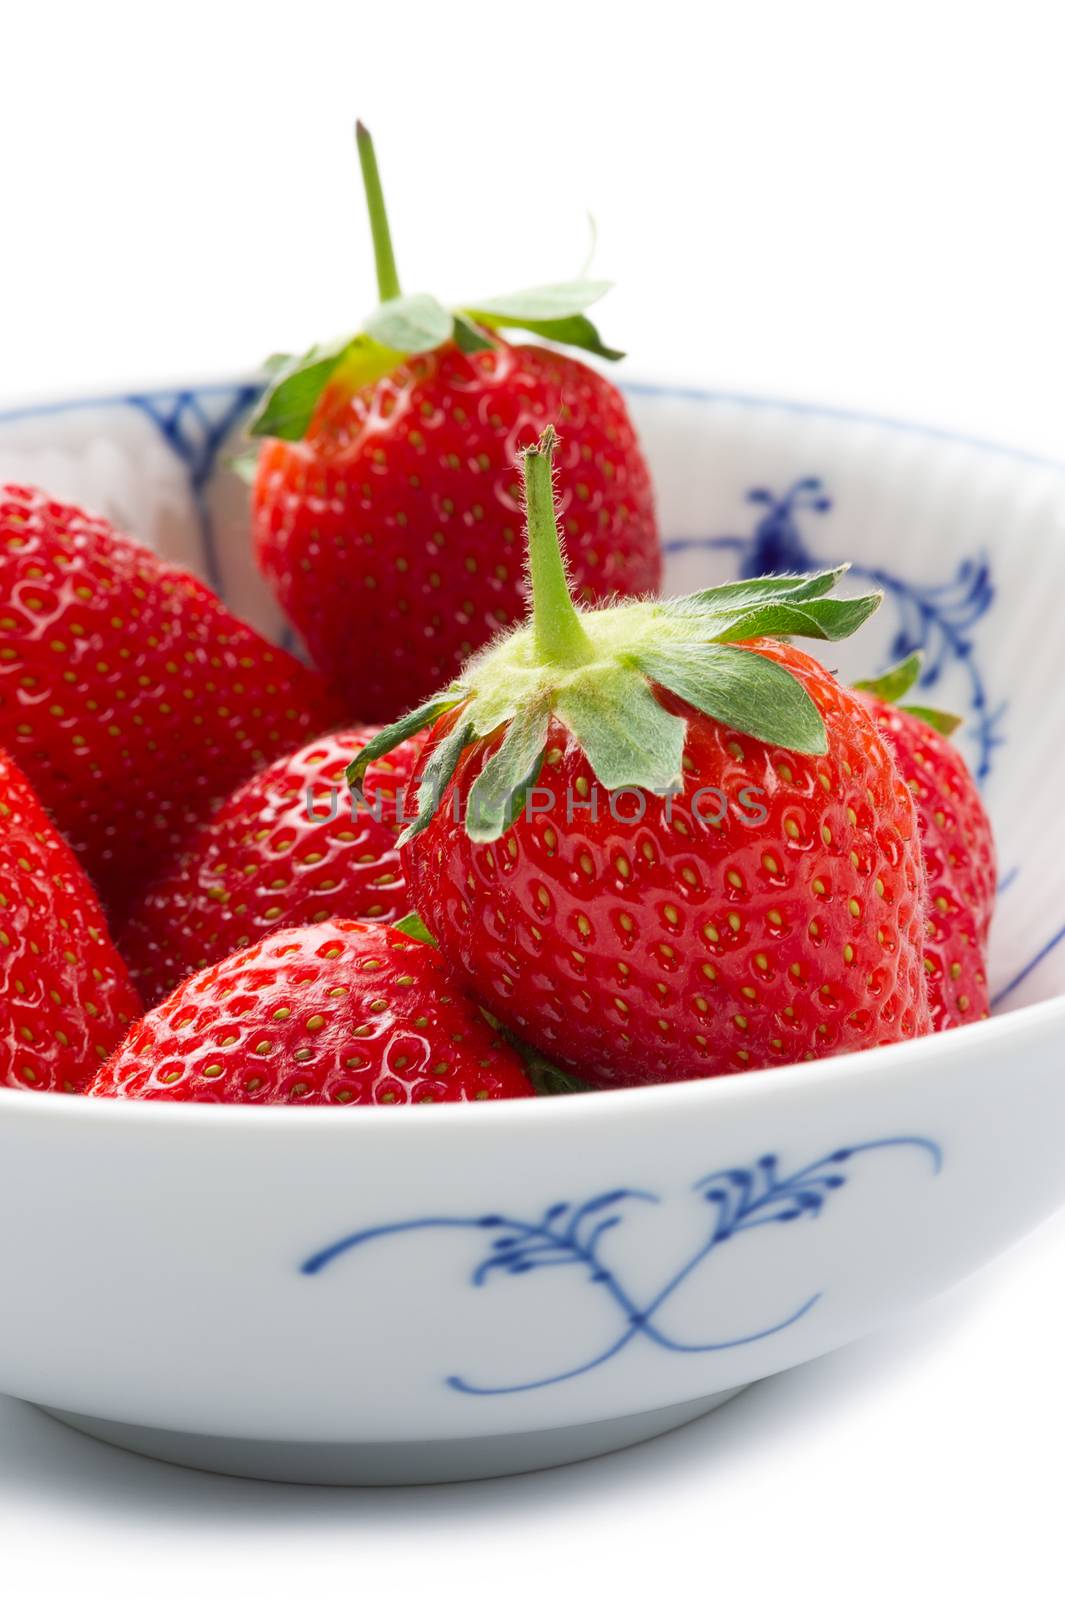 Blue and white porcelain bowl of whole fresh succulent ripe red strawberries with their green stalks attached for a healthy dessert or snack